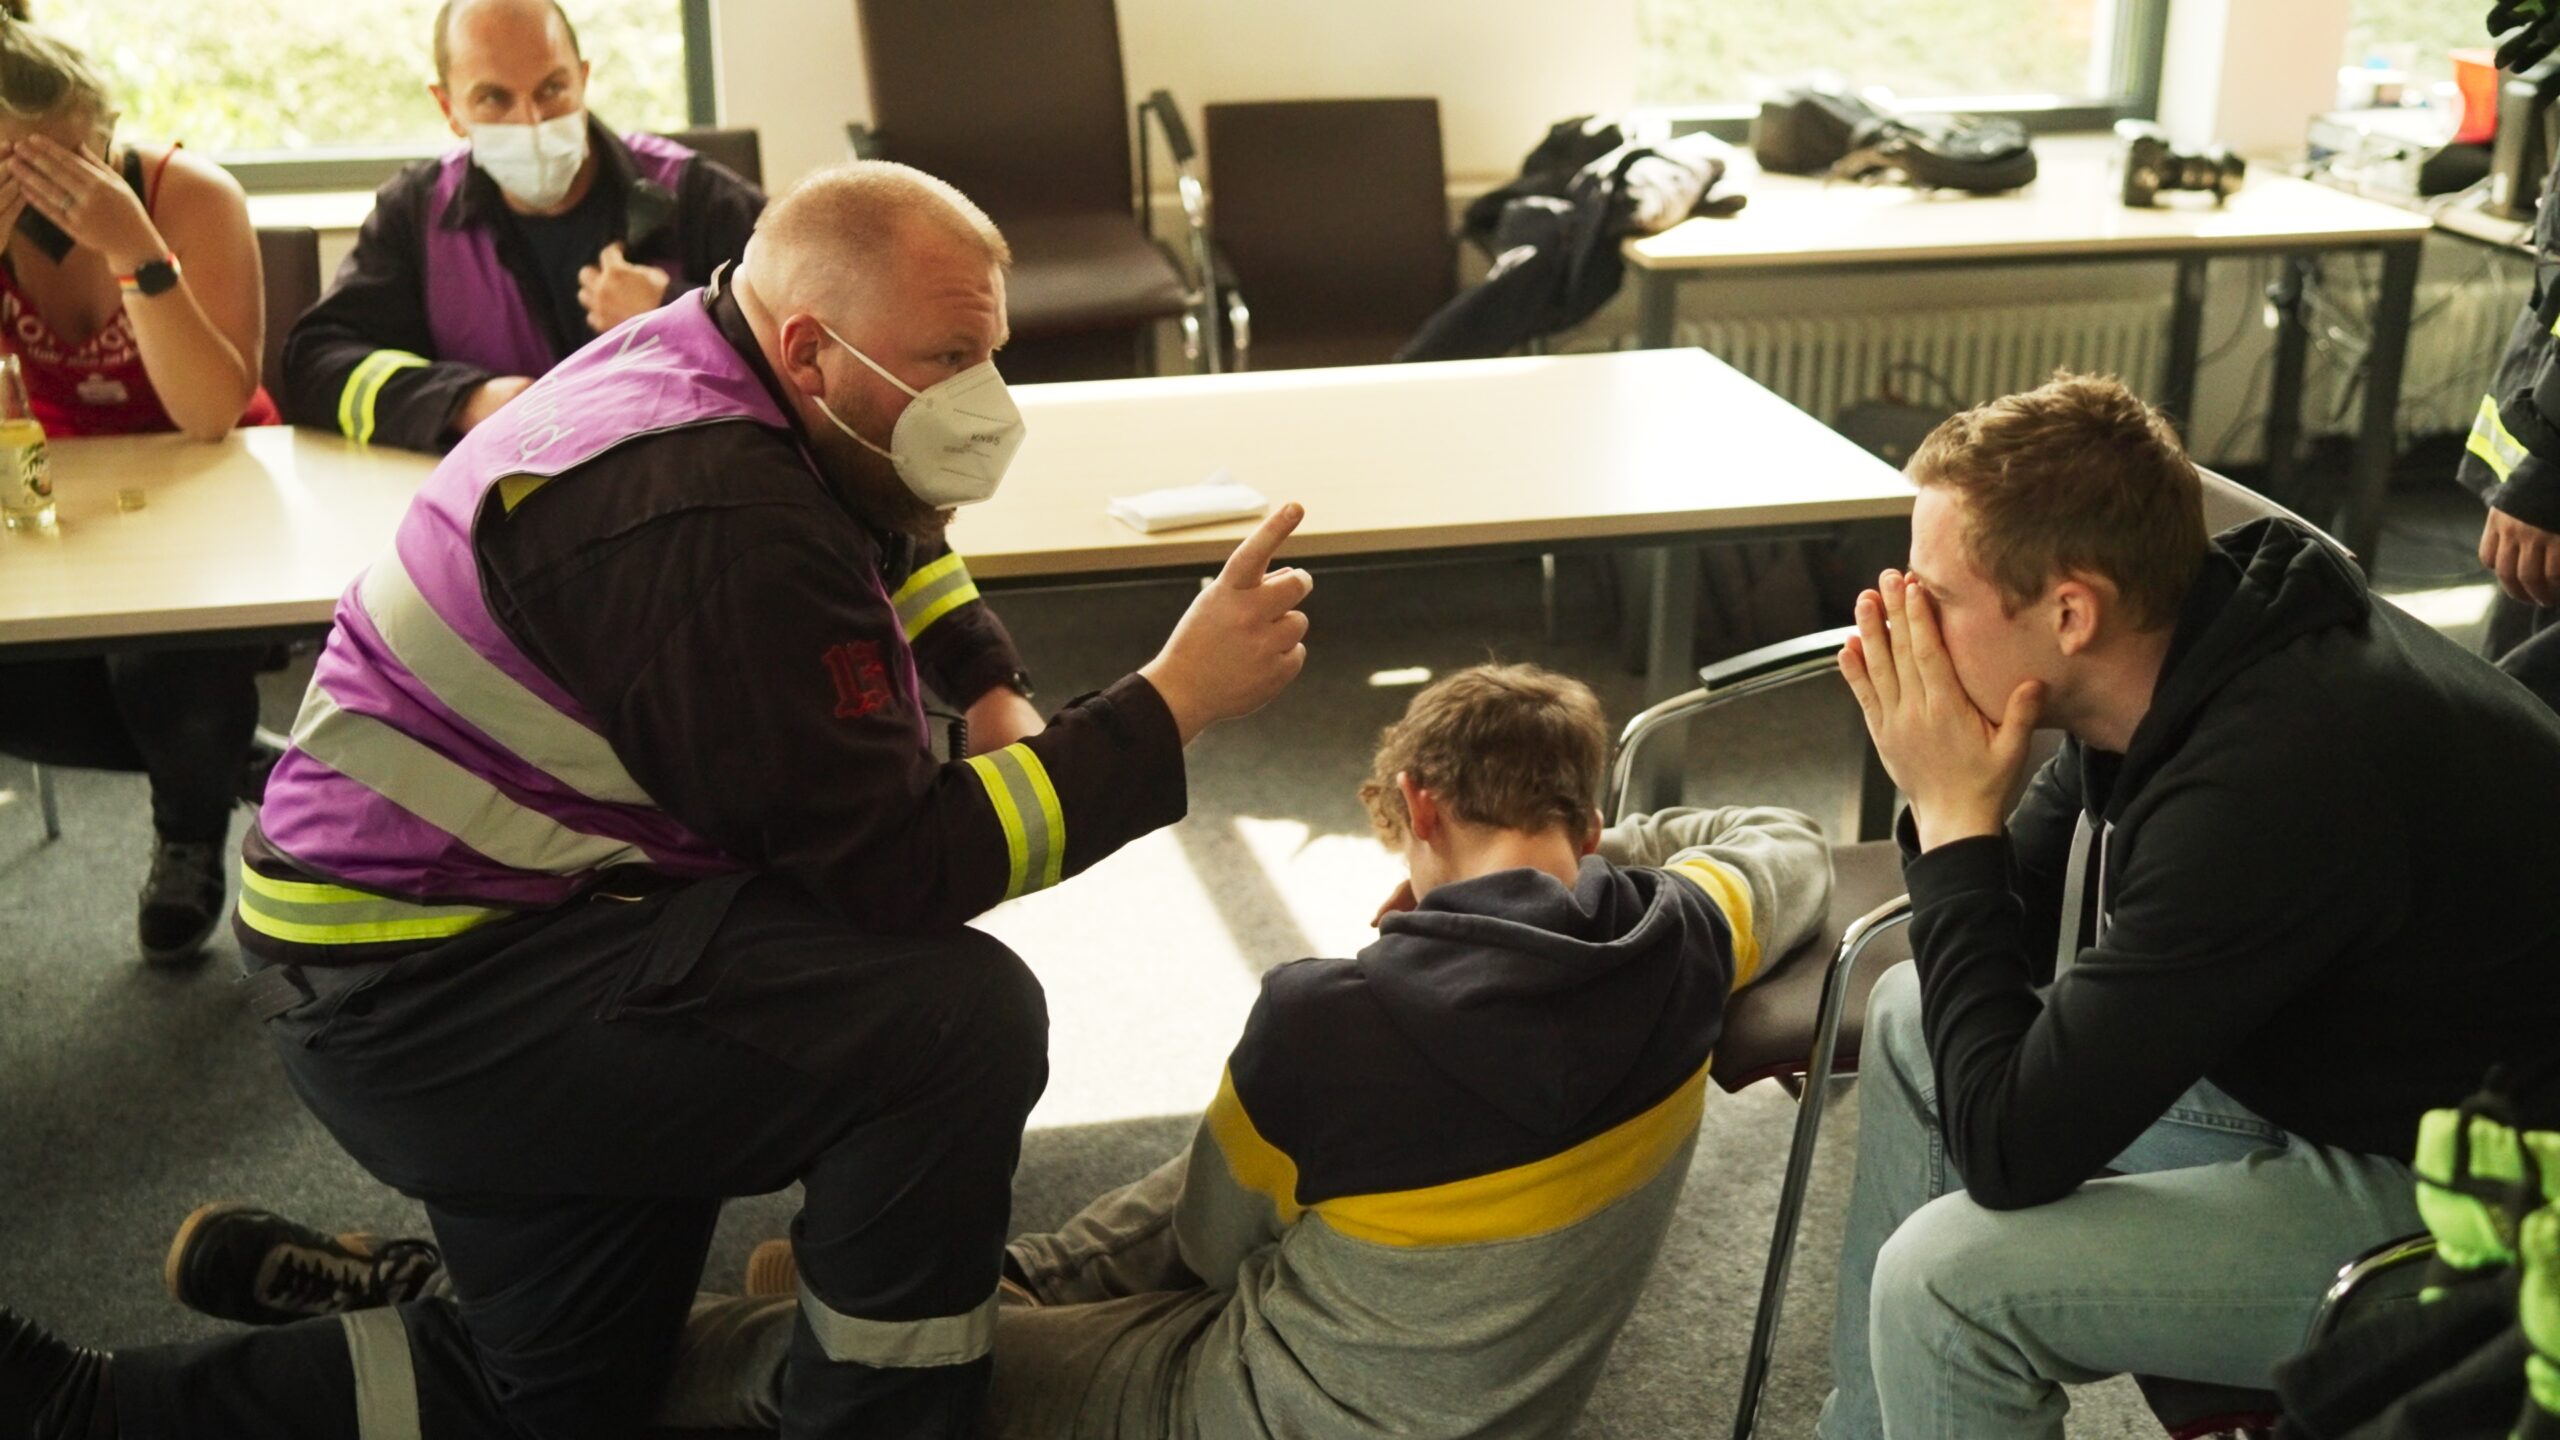 A responder is warning and explaining something to two participants in the room. Another participant and responder are sitting on the chair behind